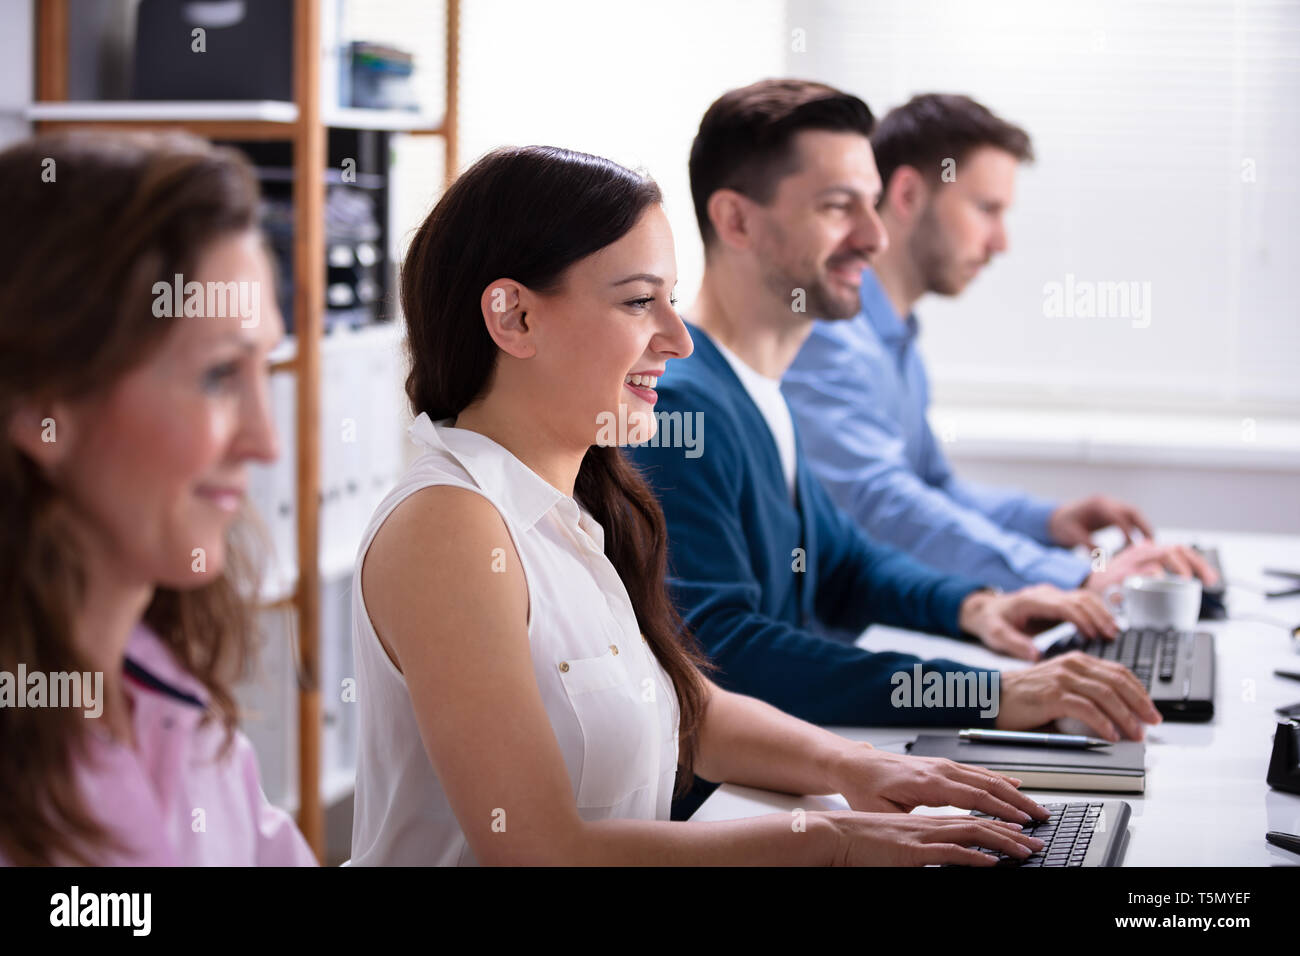 Smiling Young Business People Sitting In A Row Using Computer Stock Photo